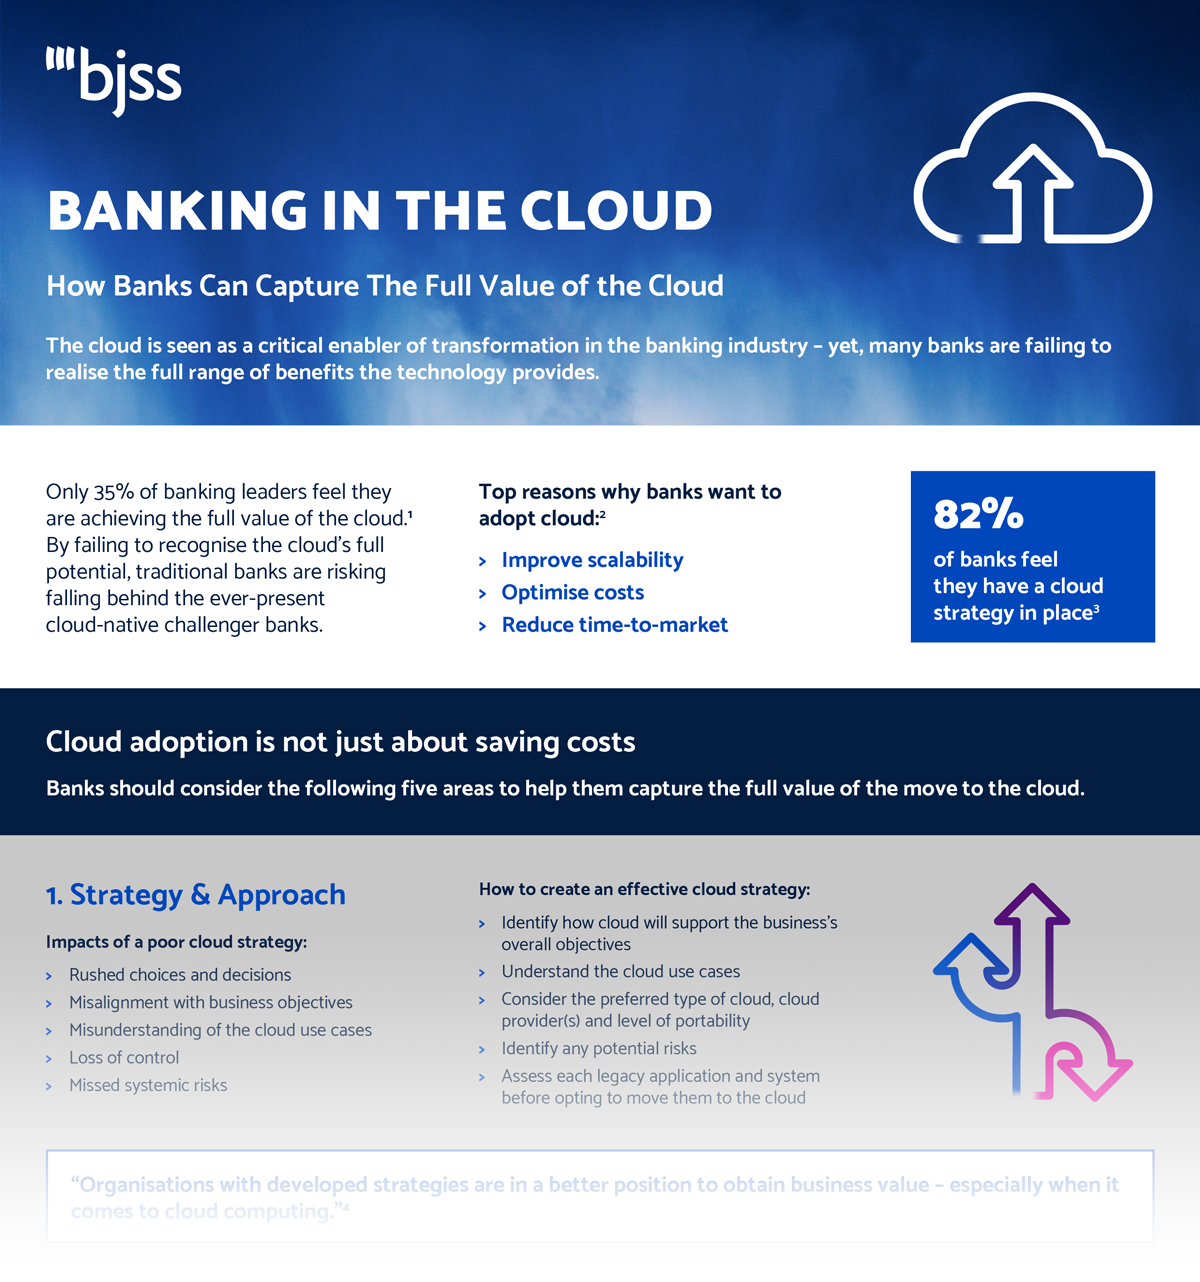 Banking in the cloud infographic